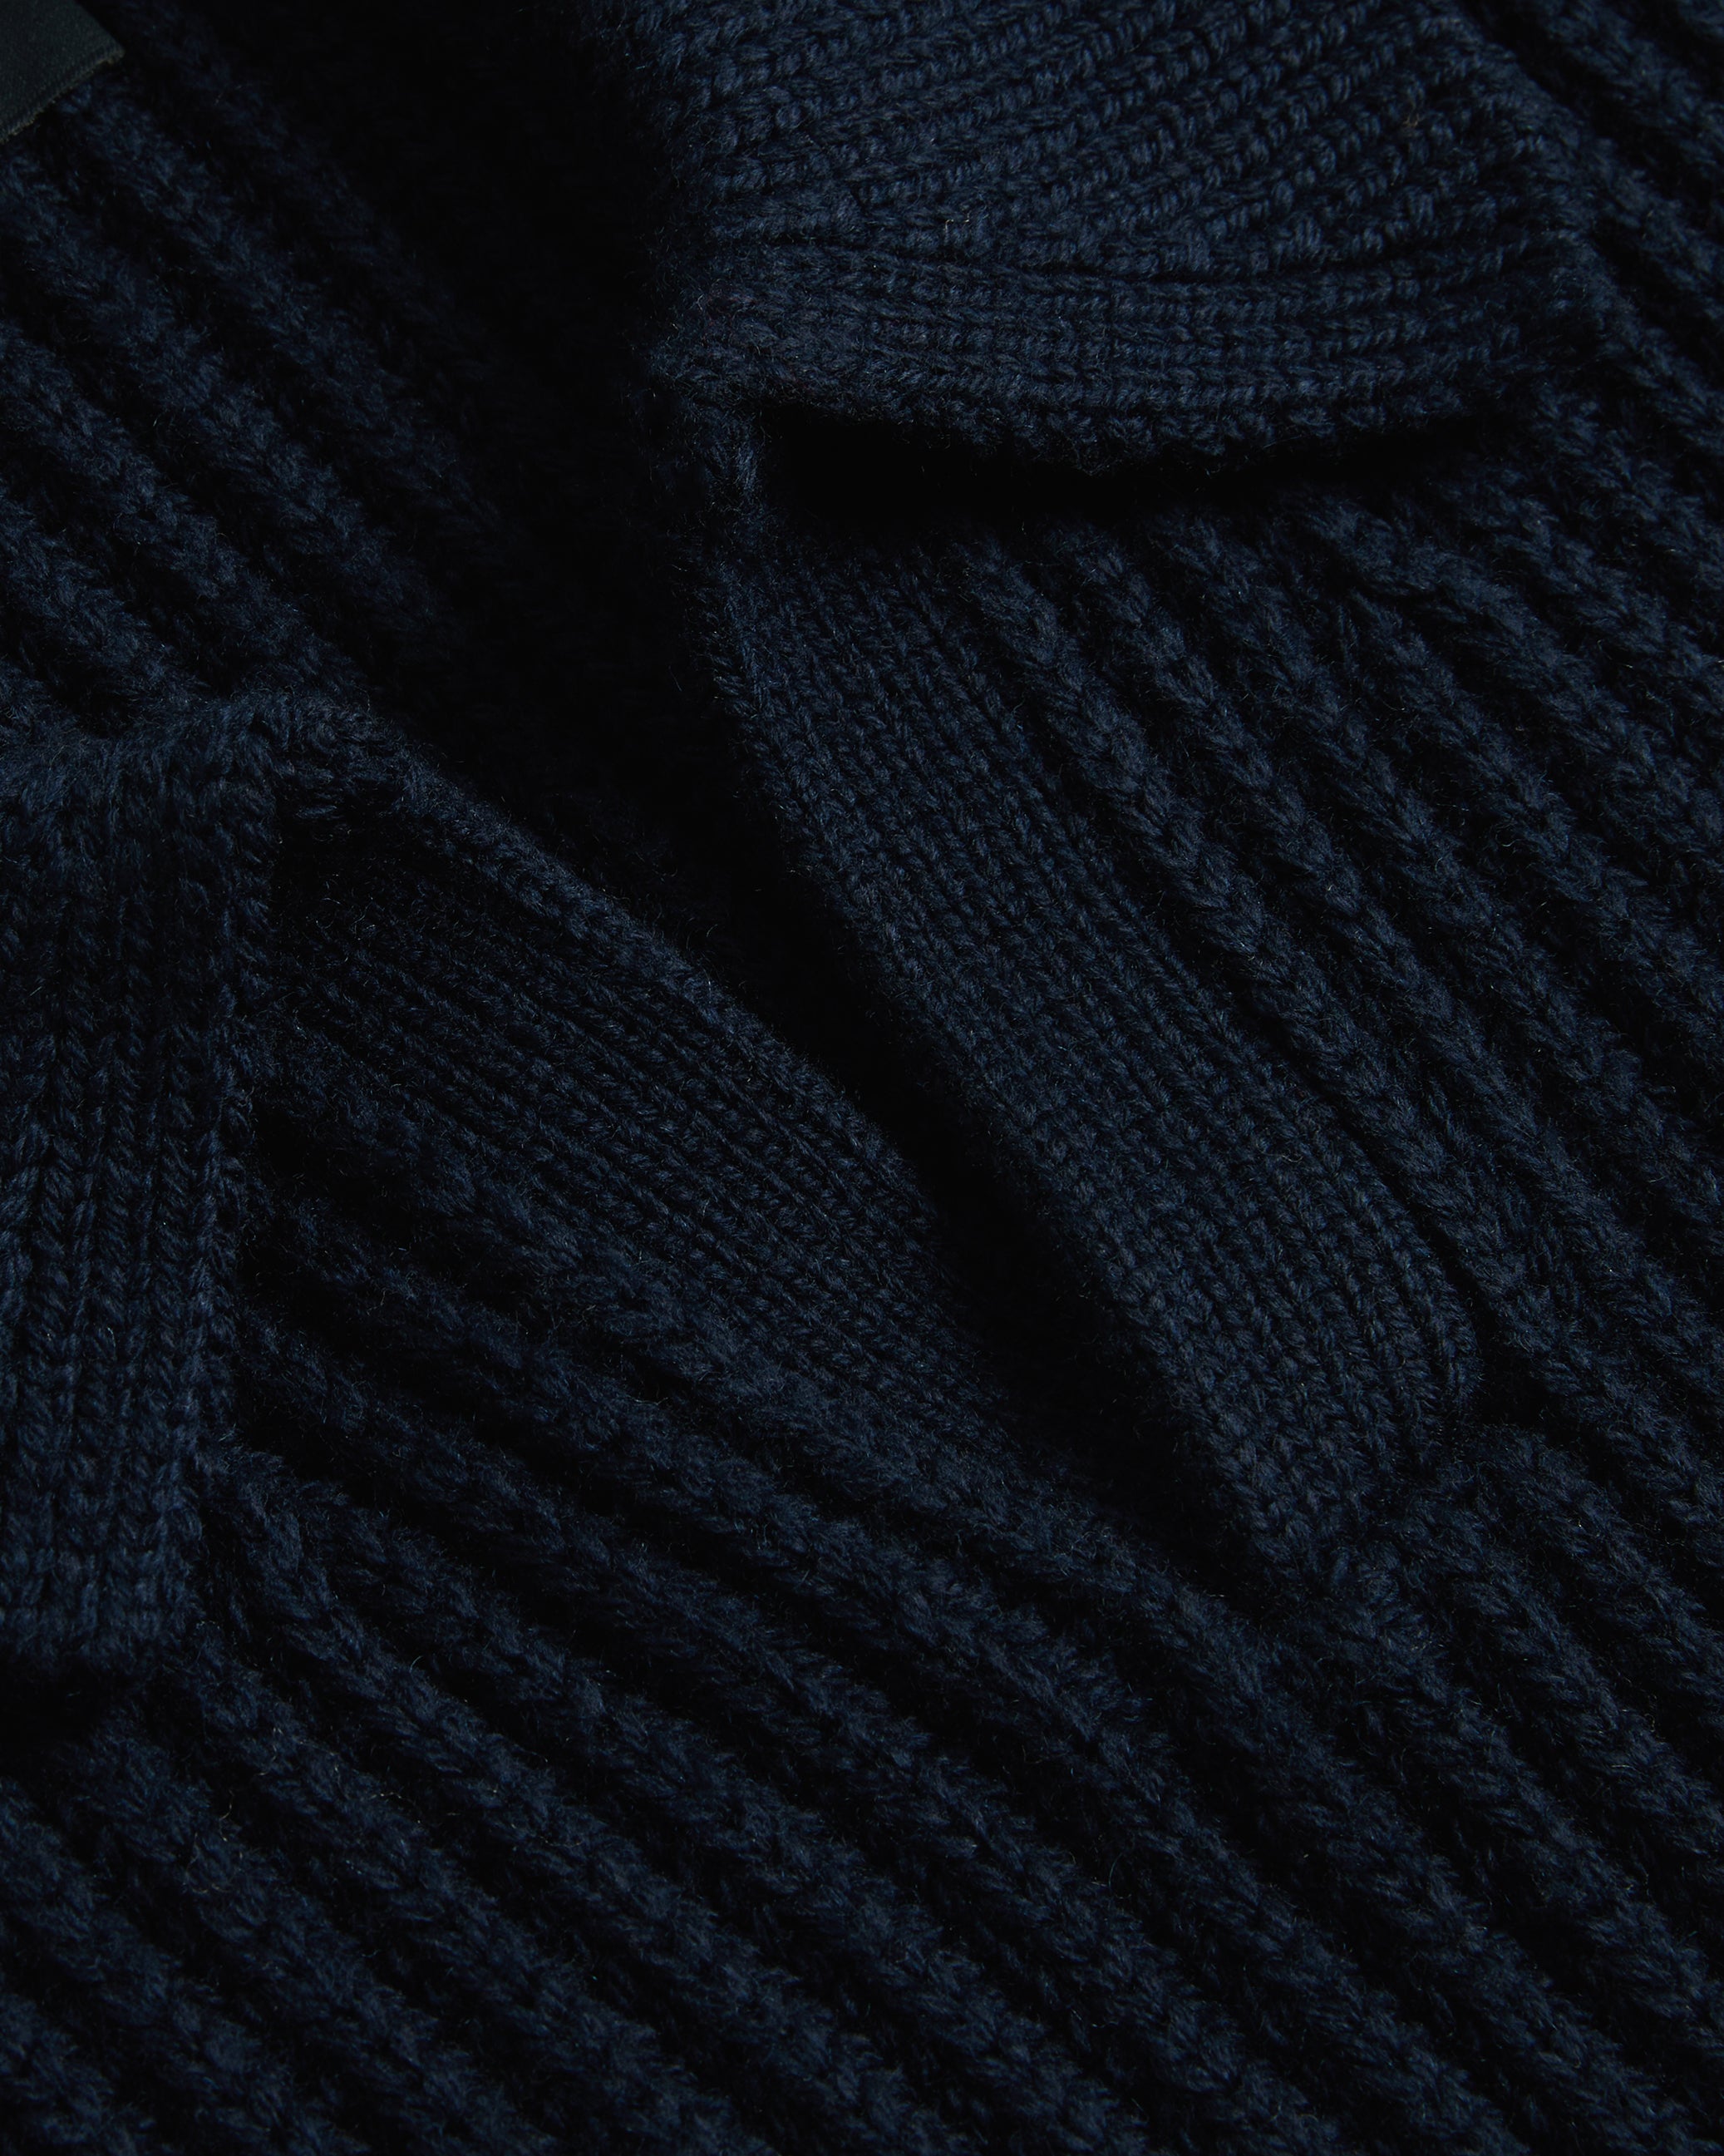 Ademy Ribbed Knit Polo Neck Jumper Navy